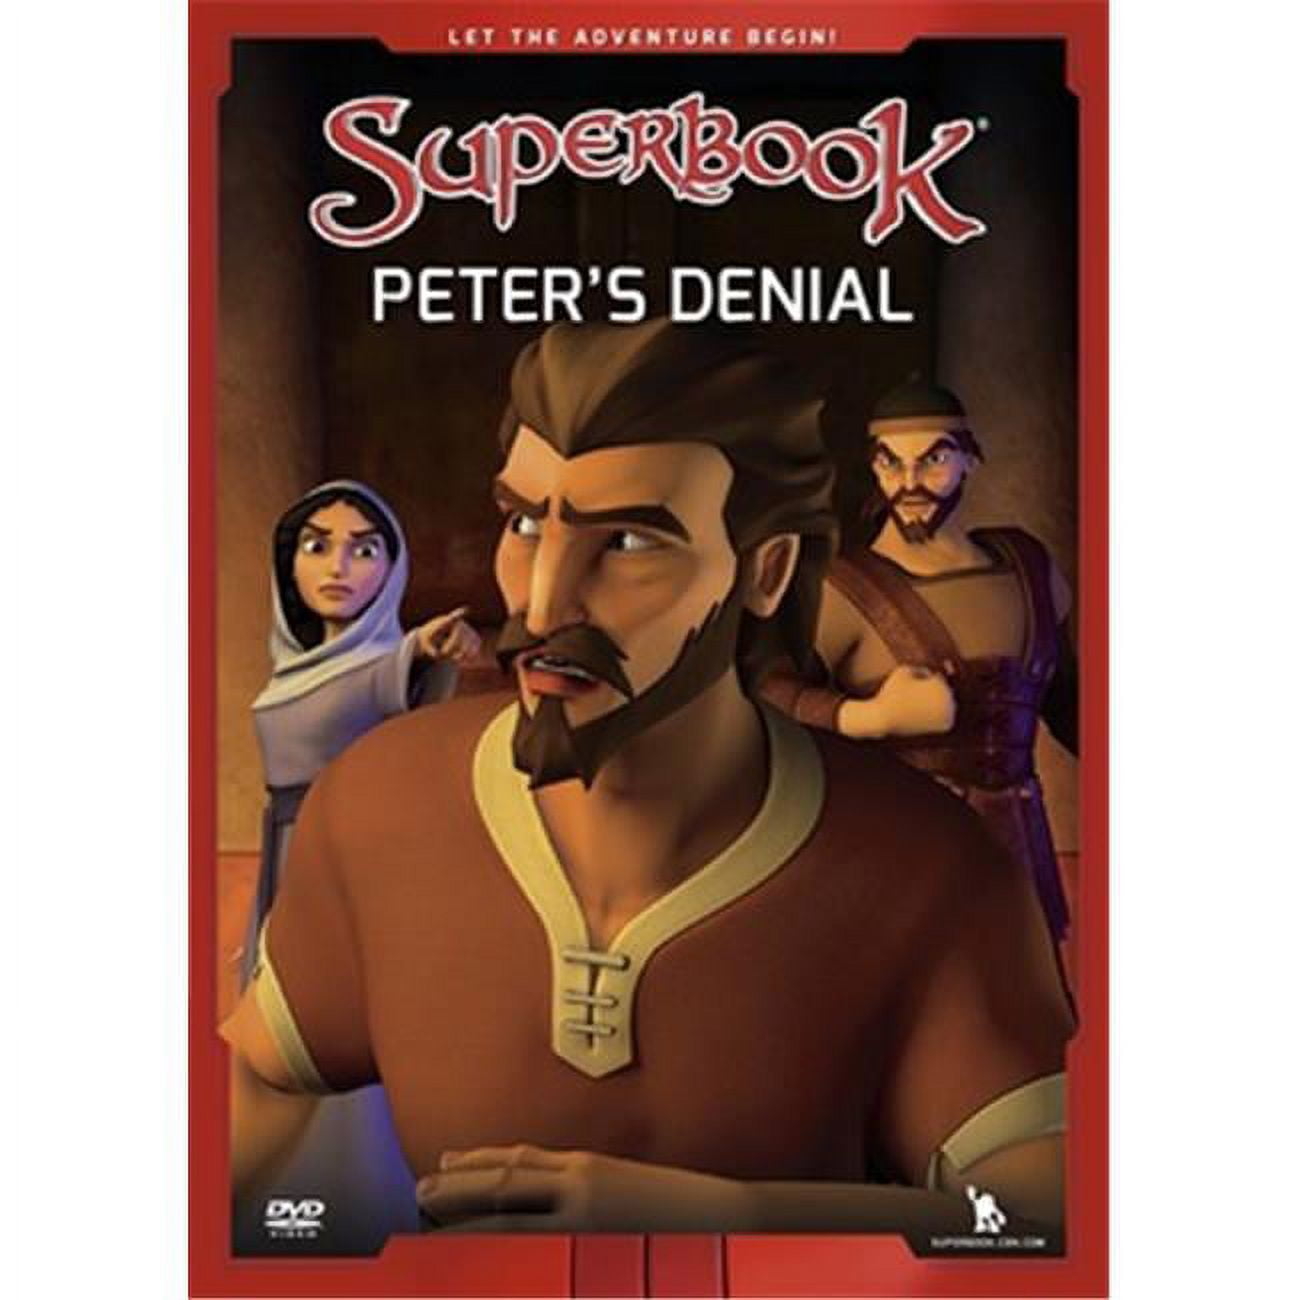 Picture of VCharisma Media Company 177950 DVD-Peters Denial - SuperBook